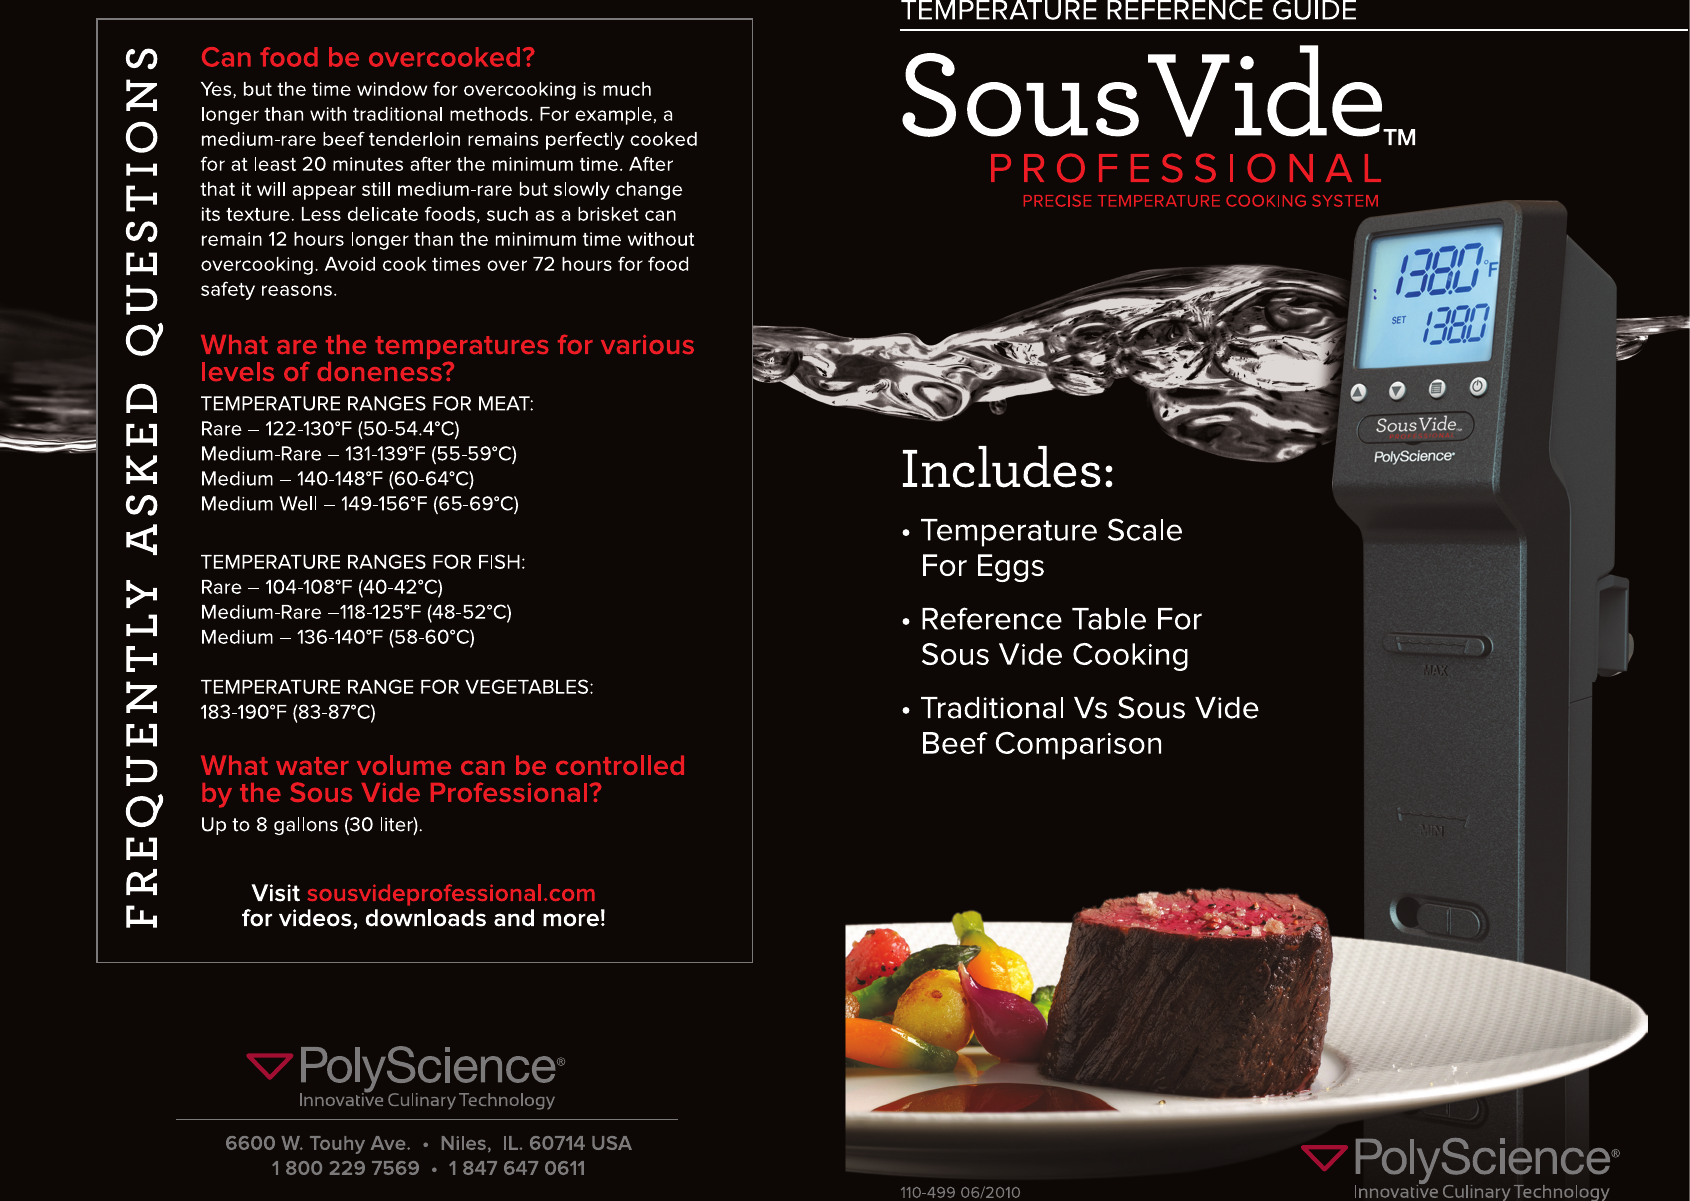 Page 1 of 2 - Polyscience Polyscience-Sousvide-Professional-Users-Manual- Print  Polyscience-sousvide-professional-users-manual